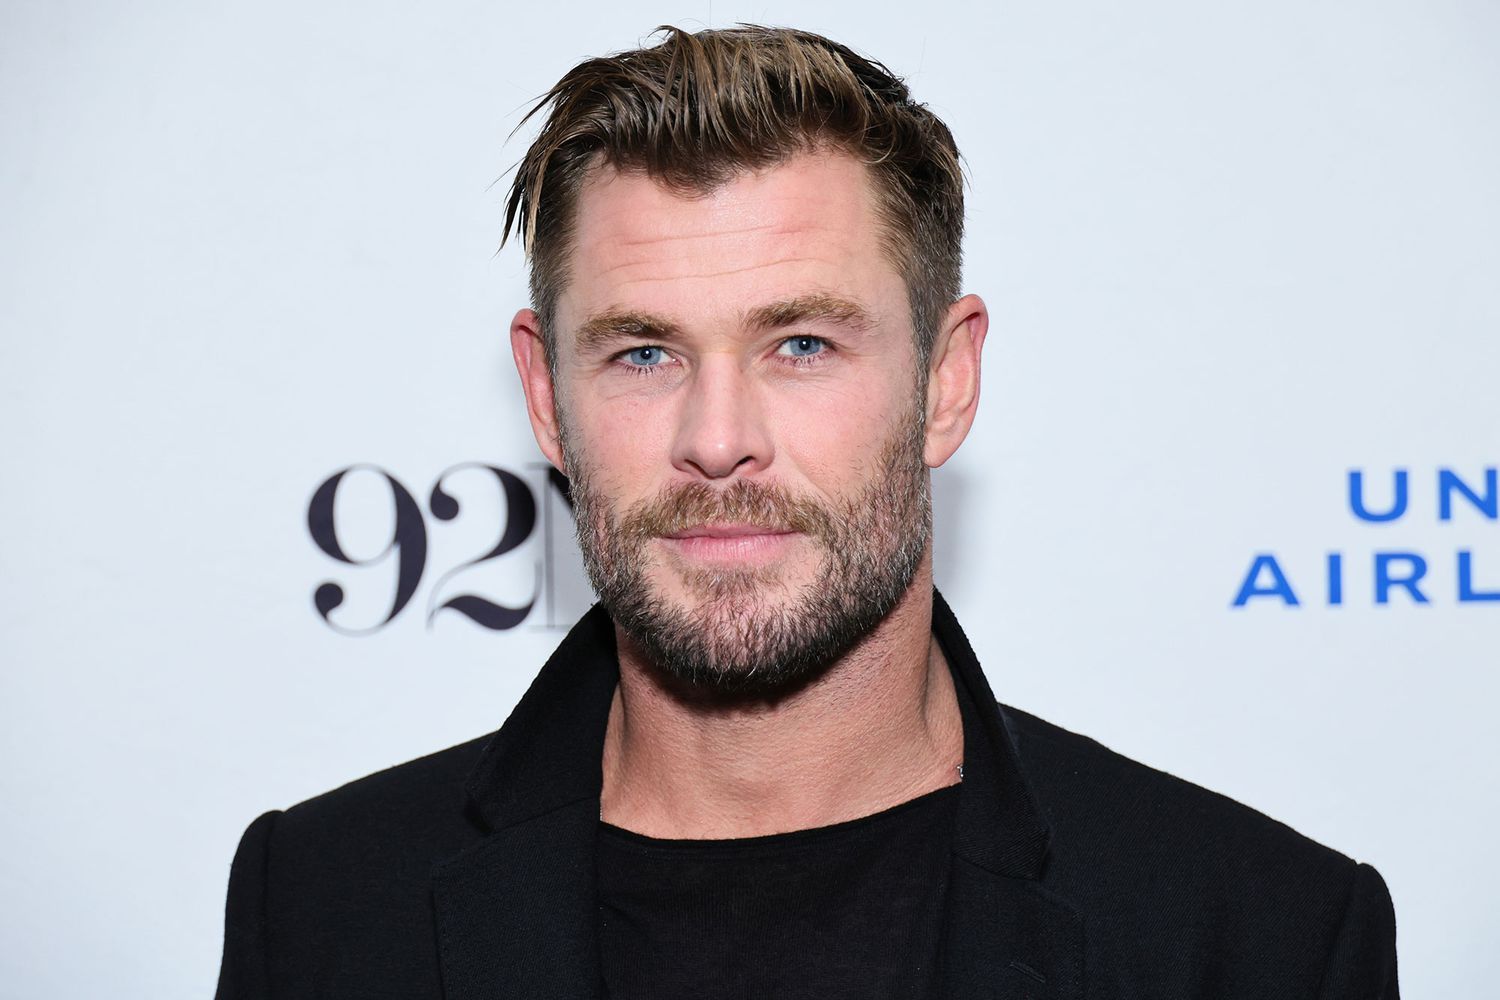 Chris Hemsworth attends National Geographic's "Limitless" Screening And Conversation at The 92nd Street Y, New York on November 16, 2022